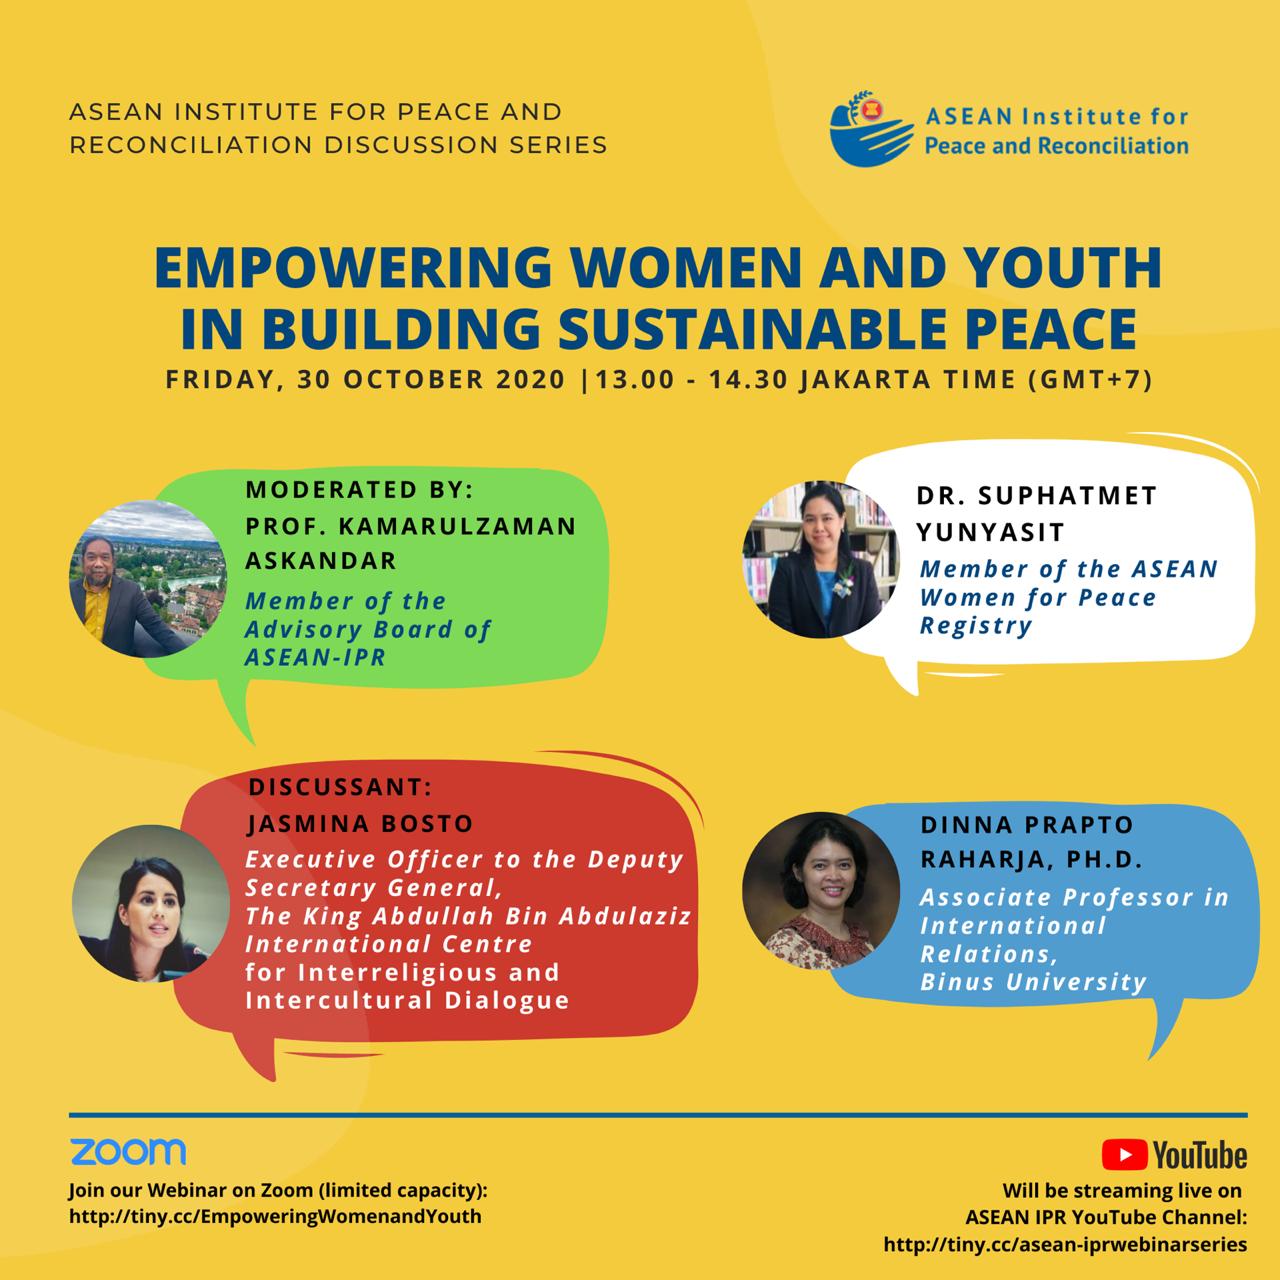 ASEAN-IPR Discussion Series: Empowering Women and Youth in Building Sustainable Peace  – Friday, 30 October 2020